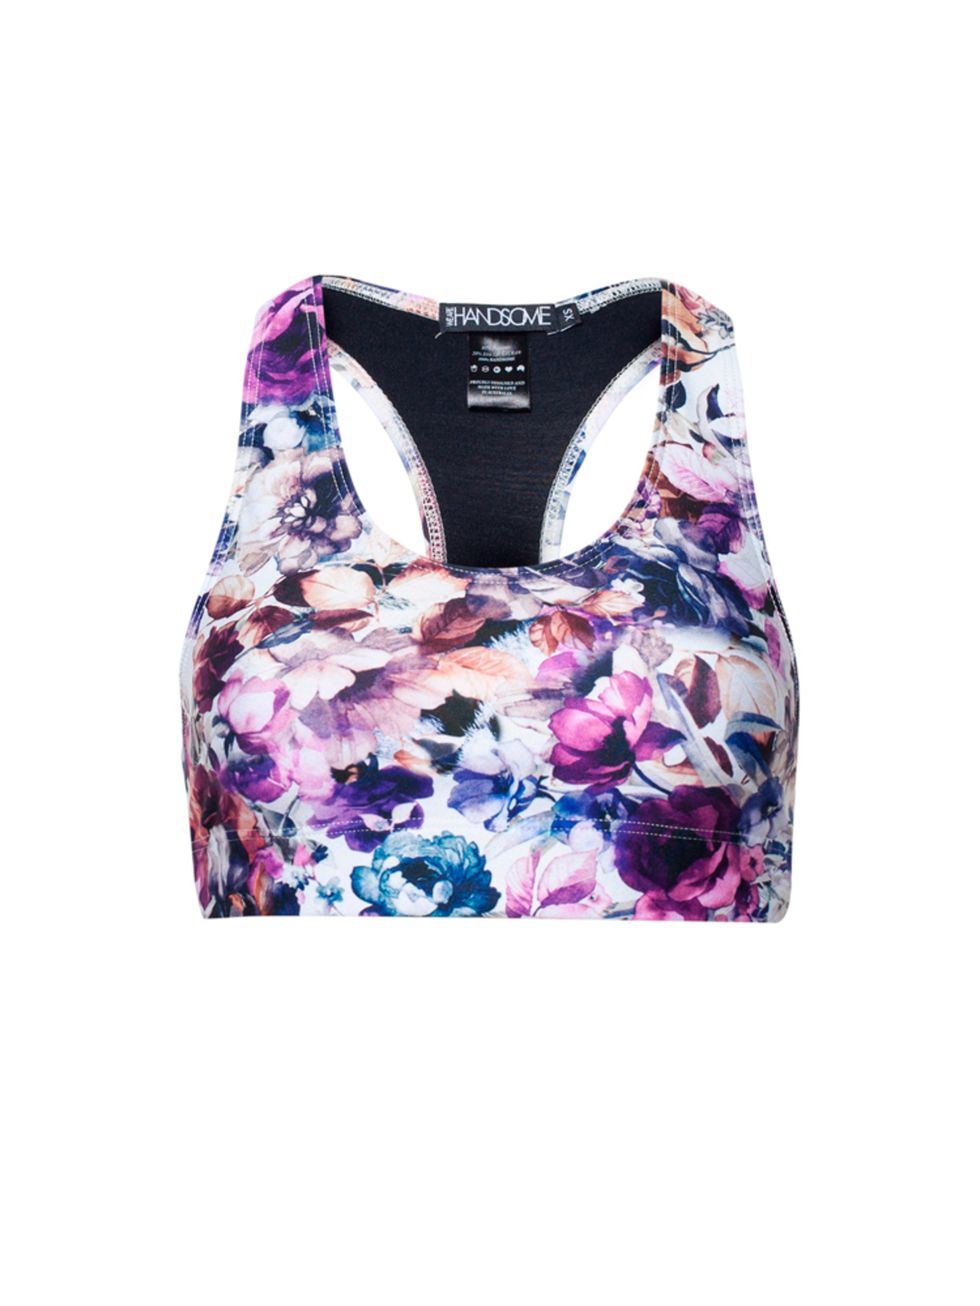 <p>WE ARE HANDSOME</p>

<p>Aussie swimwear label We Are Handsome have applied their zany prints to activewear too, so you need never blend in to the background again.</p>

<p>Best for: Dance</p>

<p>We Are Handsome sports bra, £58, from <a href="http://ww